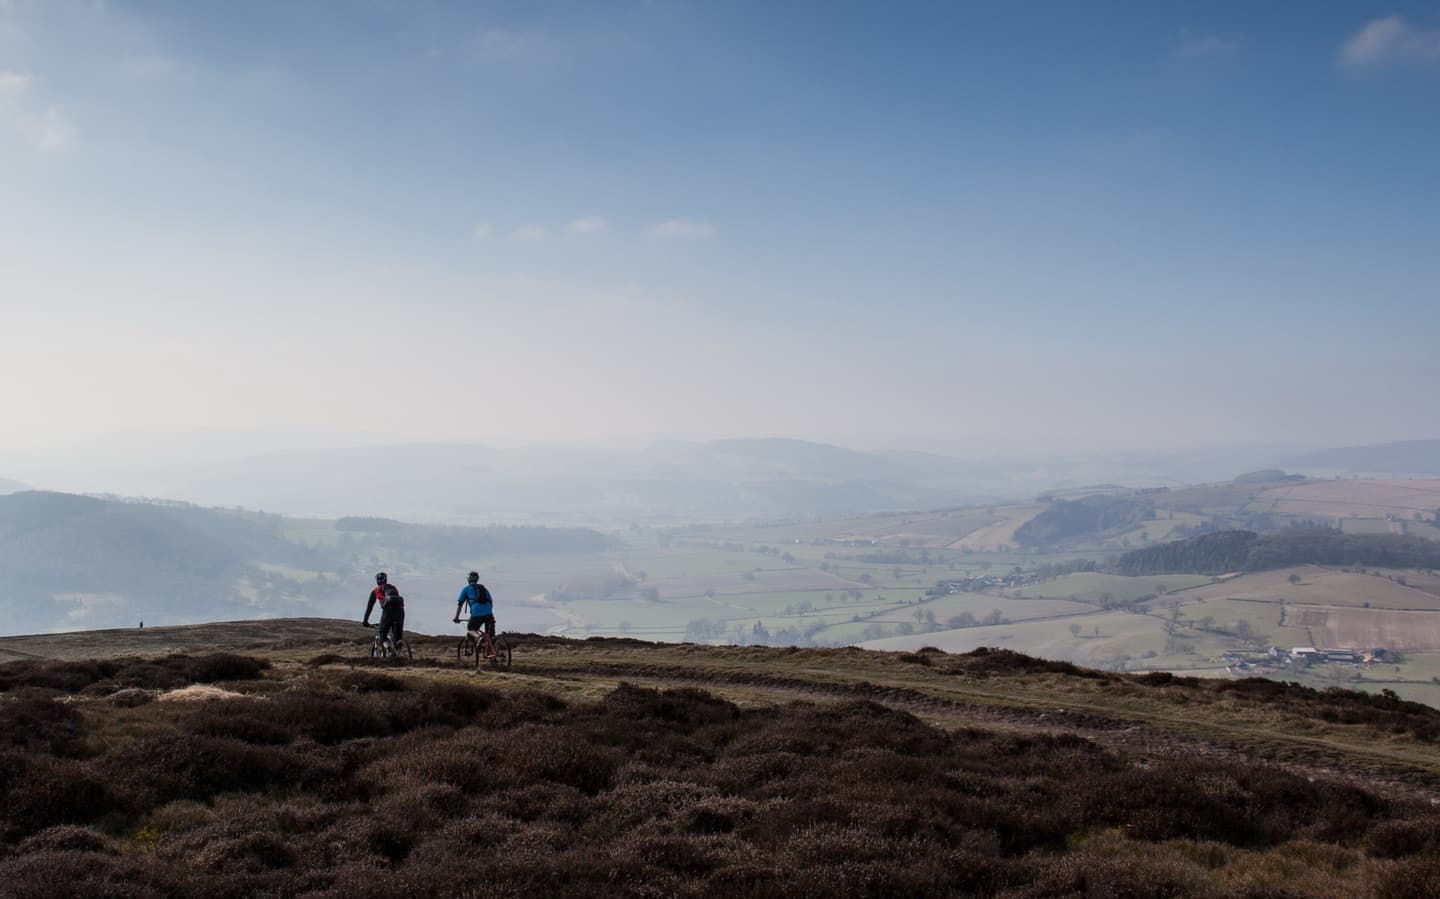 Shropshire Hills NL - Cyclists on The Portway on The Long Mynd (c) Simon Whaley